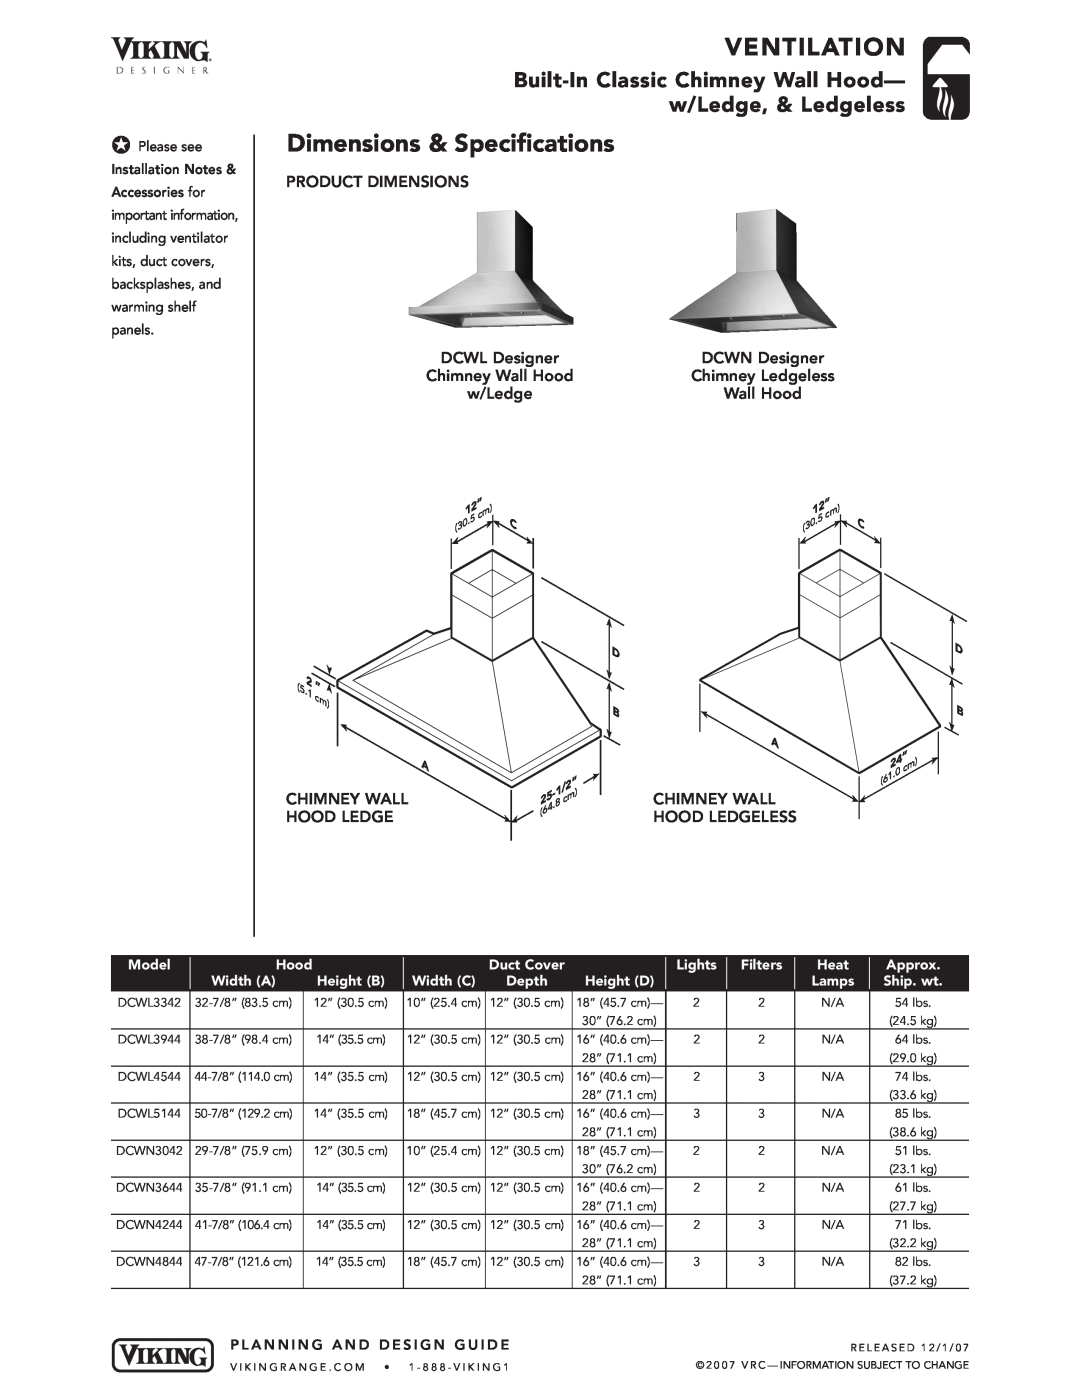 Viking DCWN Built-In Classic Chimney Wall Hood- w/Ledge, & Ledgeless, D B A, Ventilation, Dimensions & Specifications 